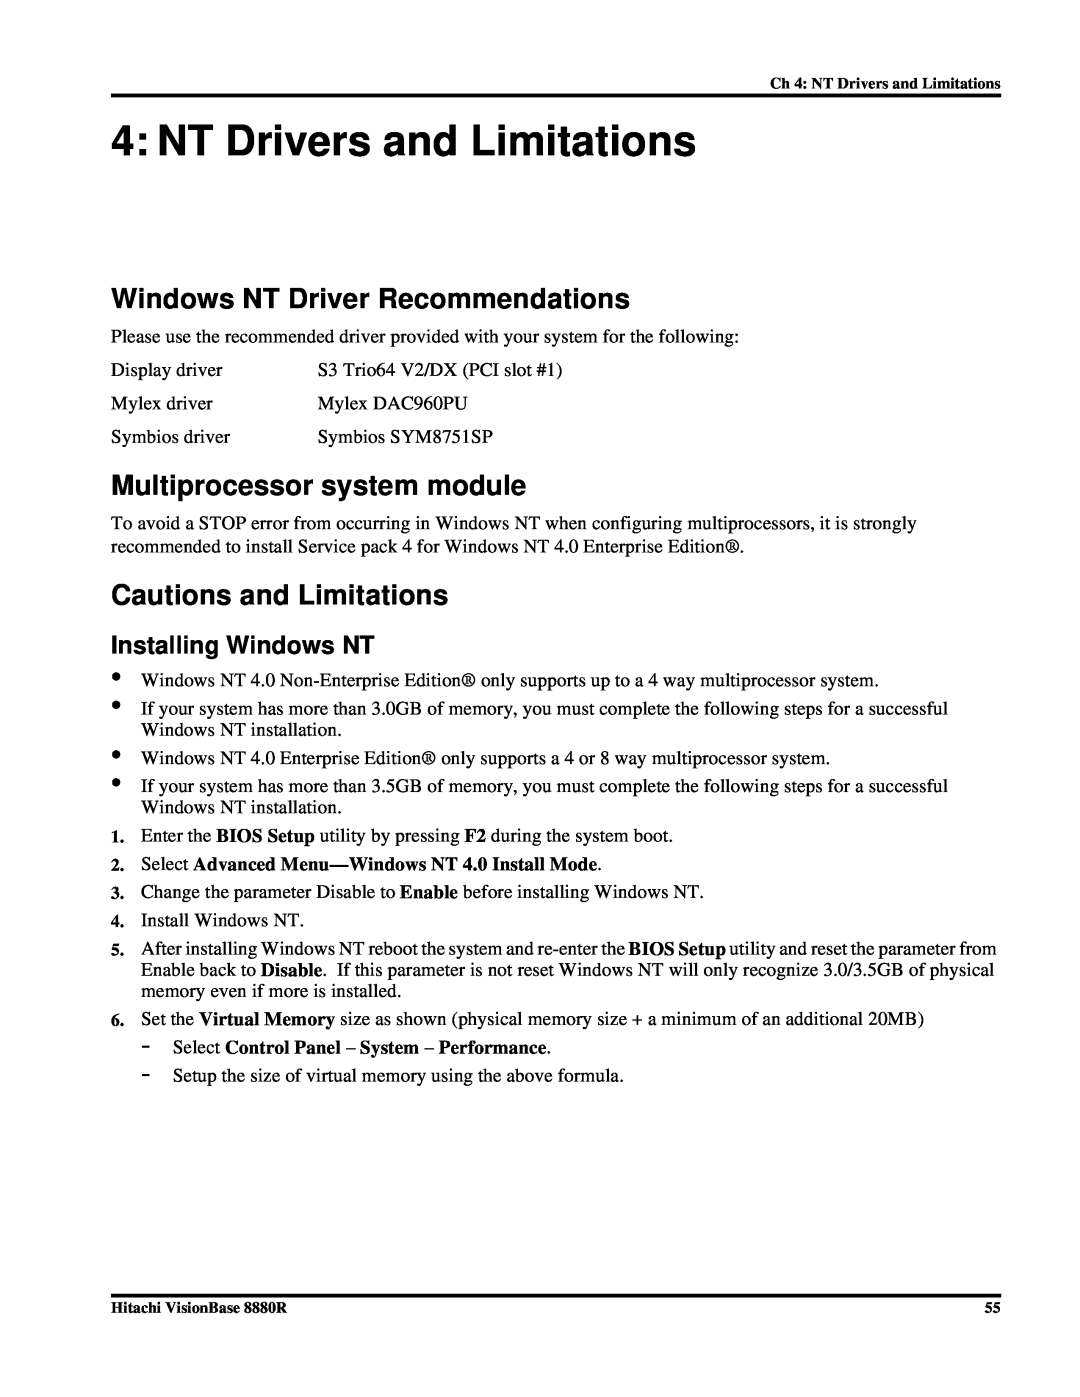 Hitachi 8880R manual NT Drivers and Limitations, Windows NT Driver Recommendations, Multiprocessor system module 